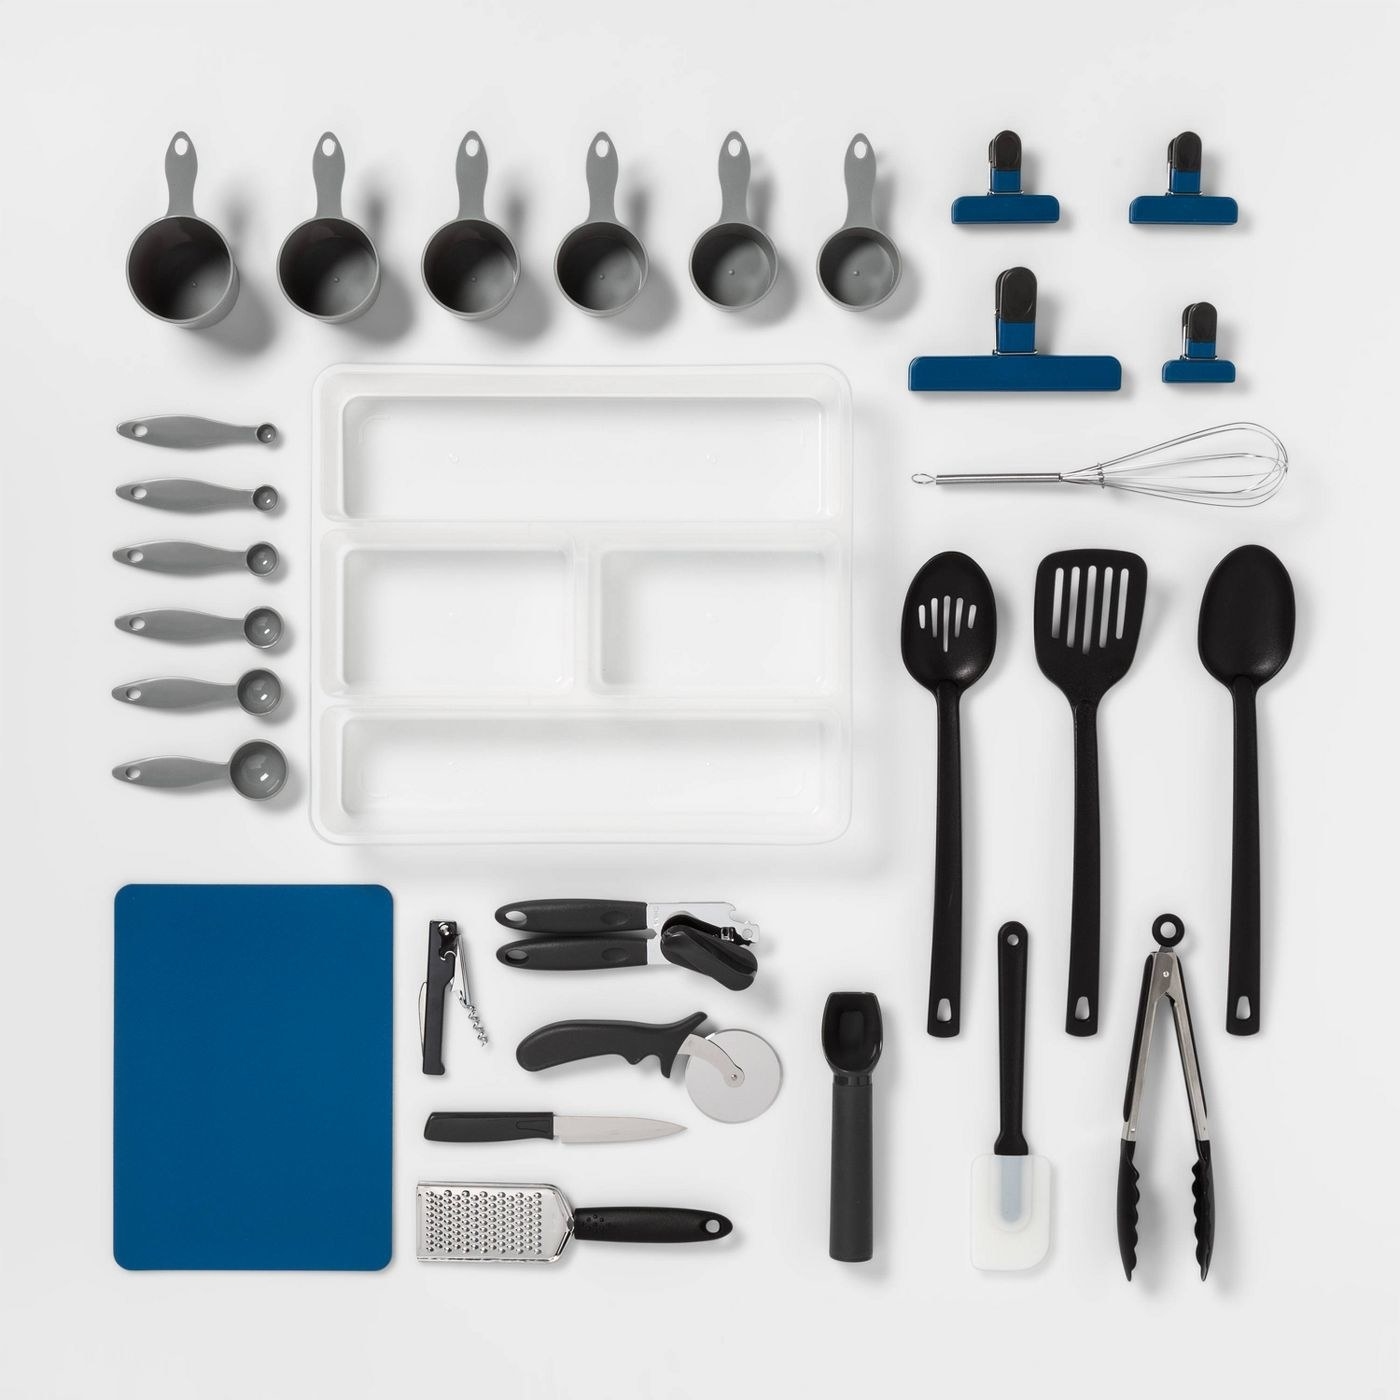 30-piece utensil set include tongs, spoons, measuring cups, measuring spoons, organizer, and more